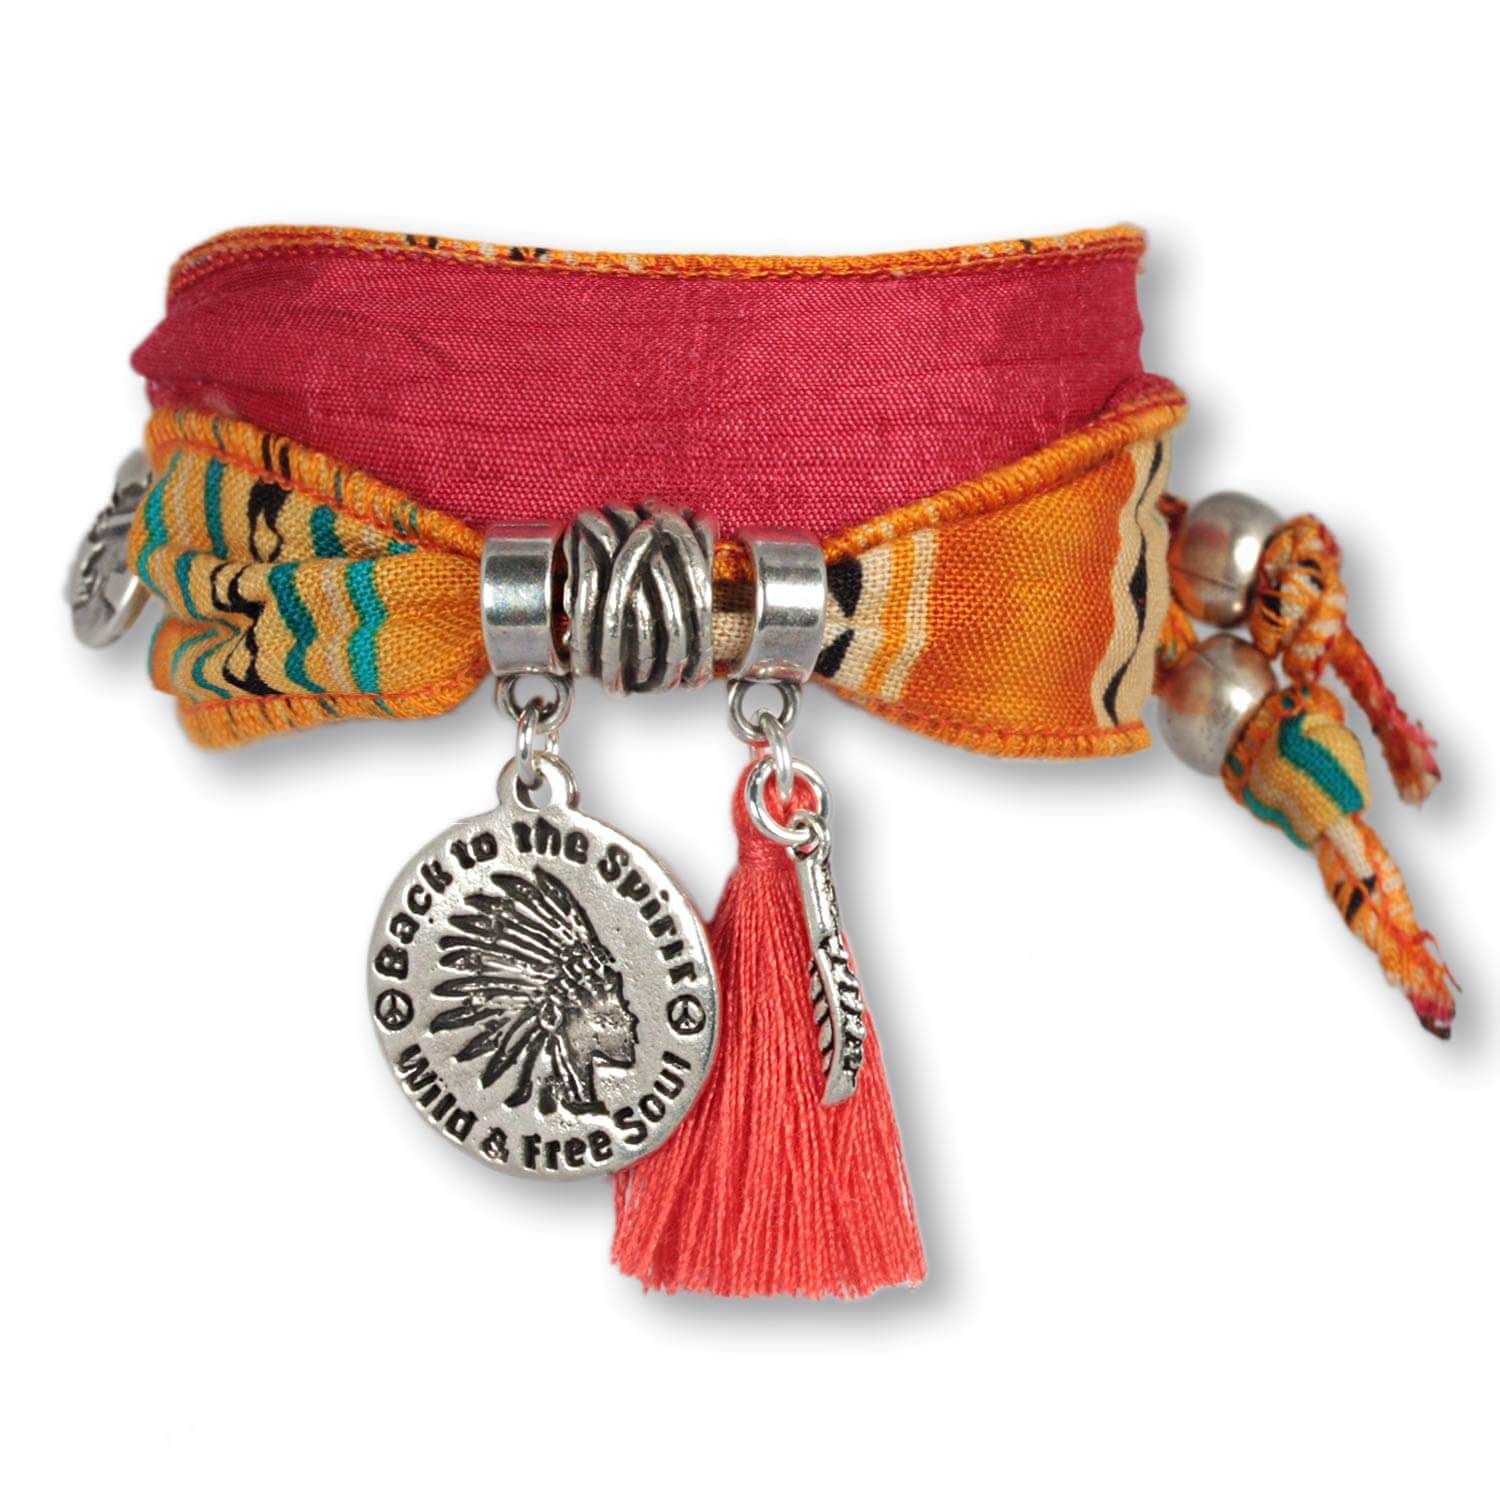 Desert Sun Coin- coin bracelet with traditional patterns